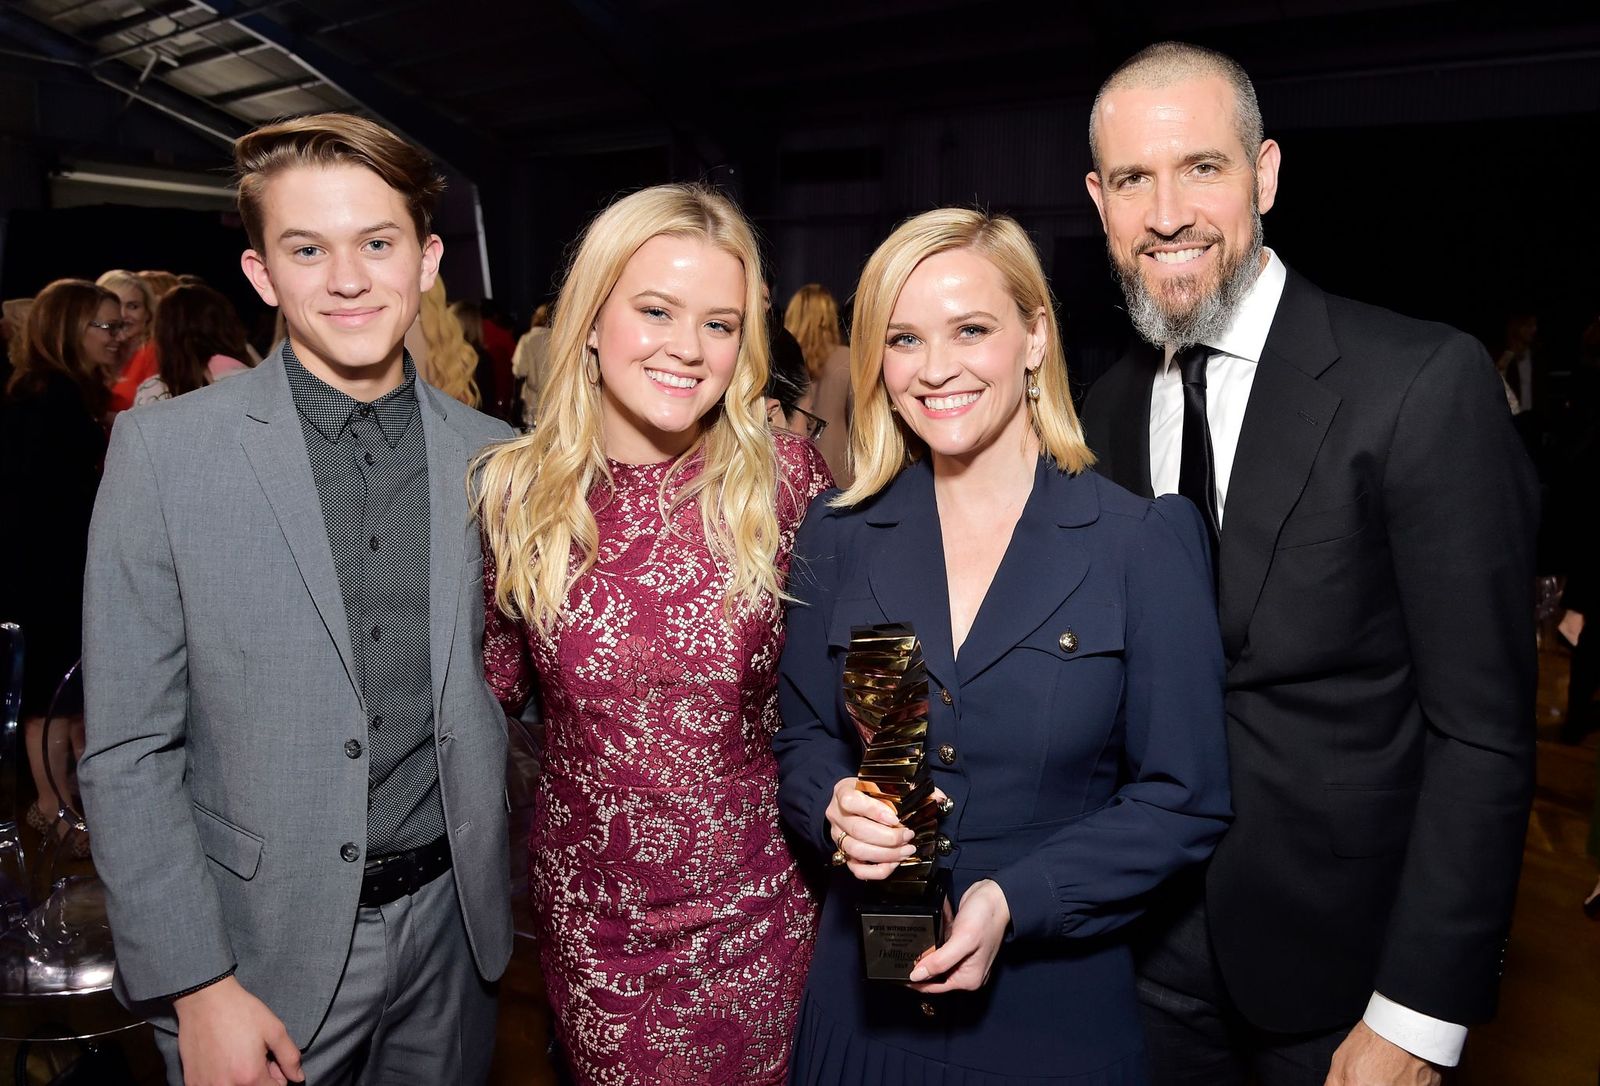 Deacon Reese Phillippe, Ava Elizabeth Phillippe, Reese Witherspoon, and Jim Toth at The Hollywood Reporter's Power 100 Women in Entertainment on December 11, 2019, in Hollywood, California | Photo: Stefanie Keenan/Getty Images